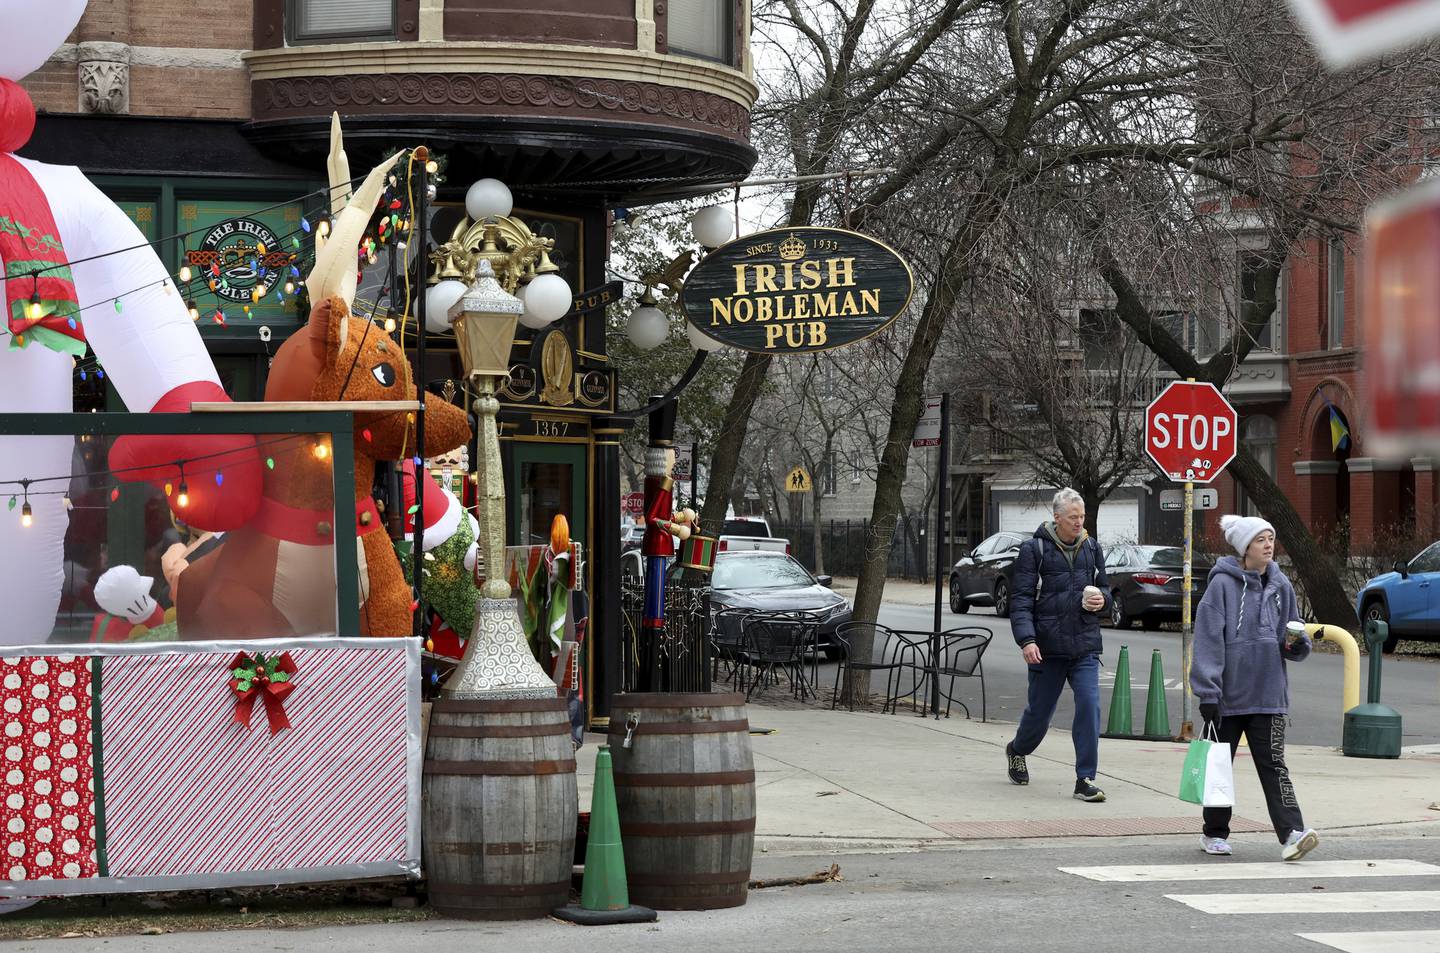 City inspectors asked the Irish Nobleman Pub to remove its annual decorations due to safety concerns for drivers.